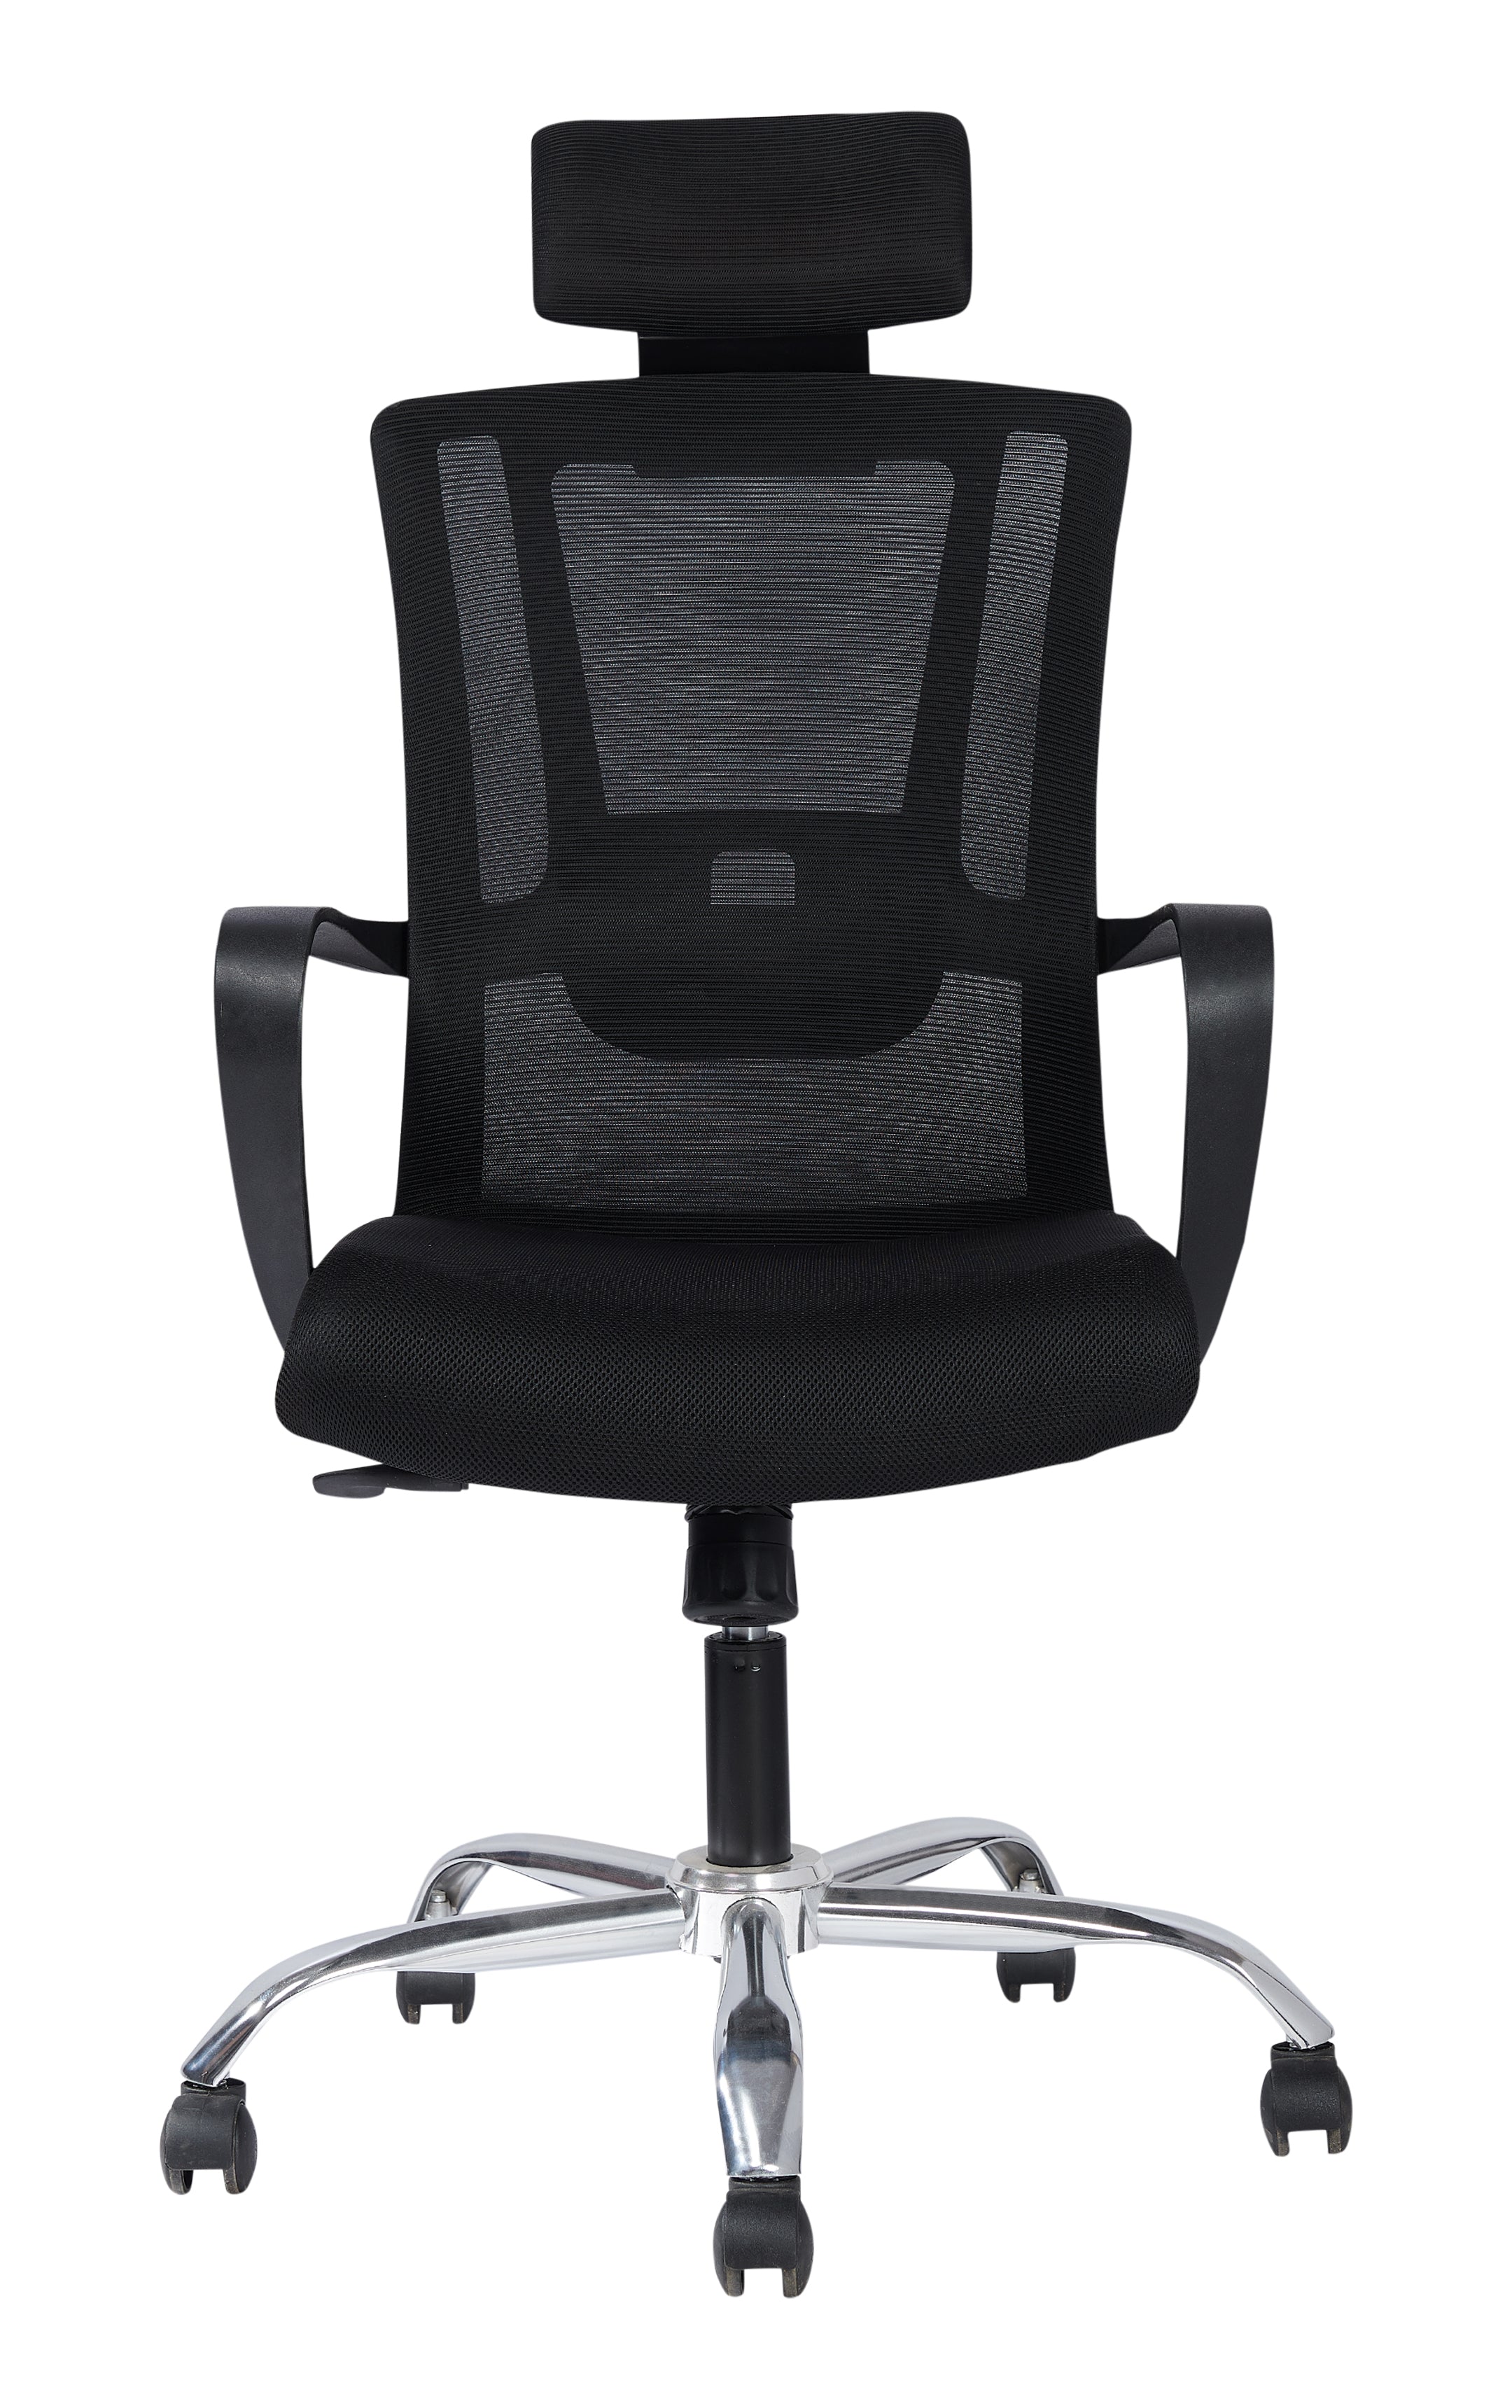 Eiger High back Office Work Station Chair with Cushion Seat And Chrome Base - Black